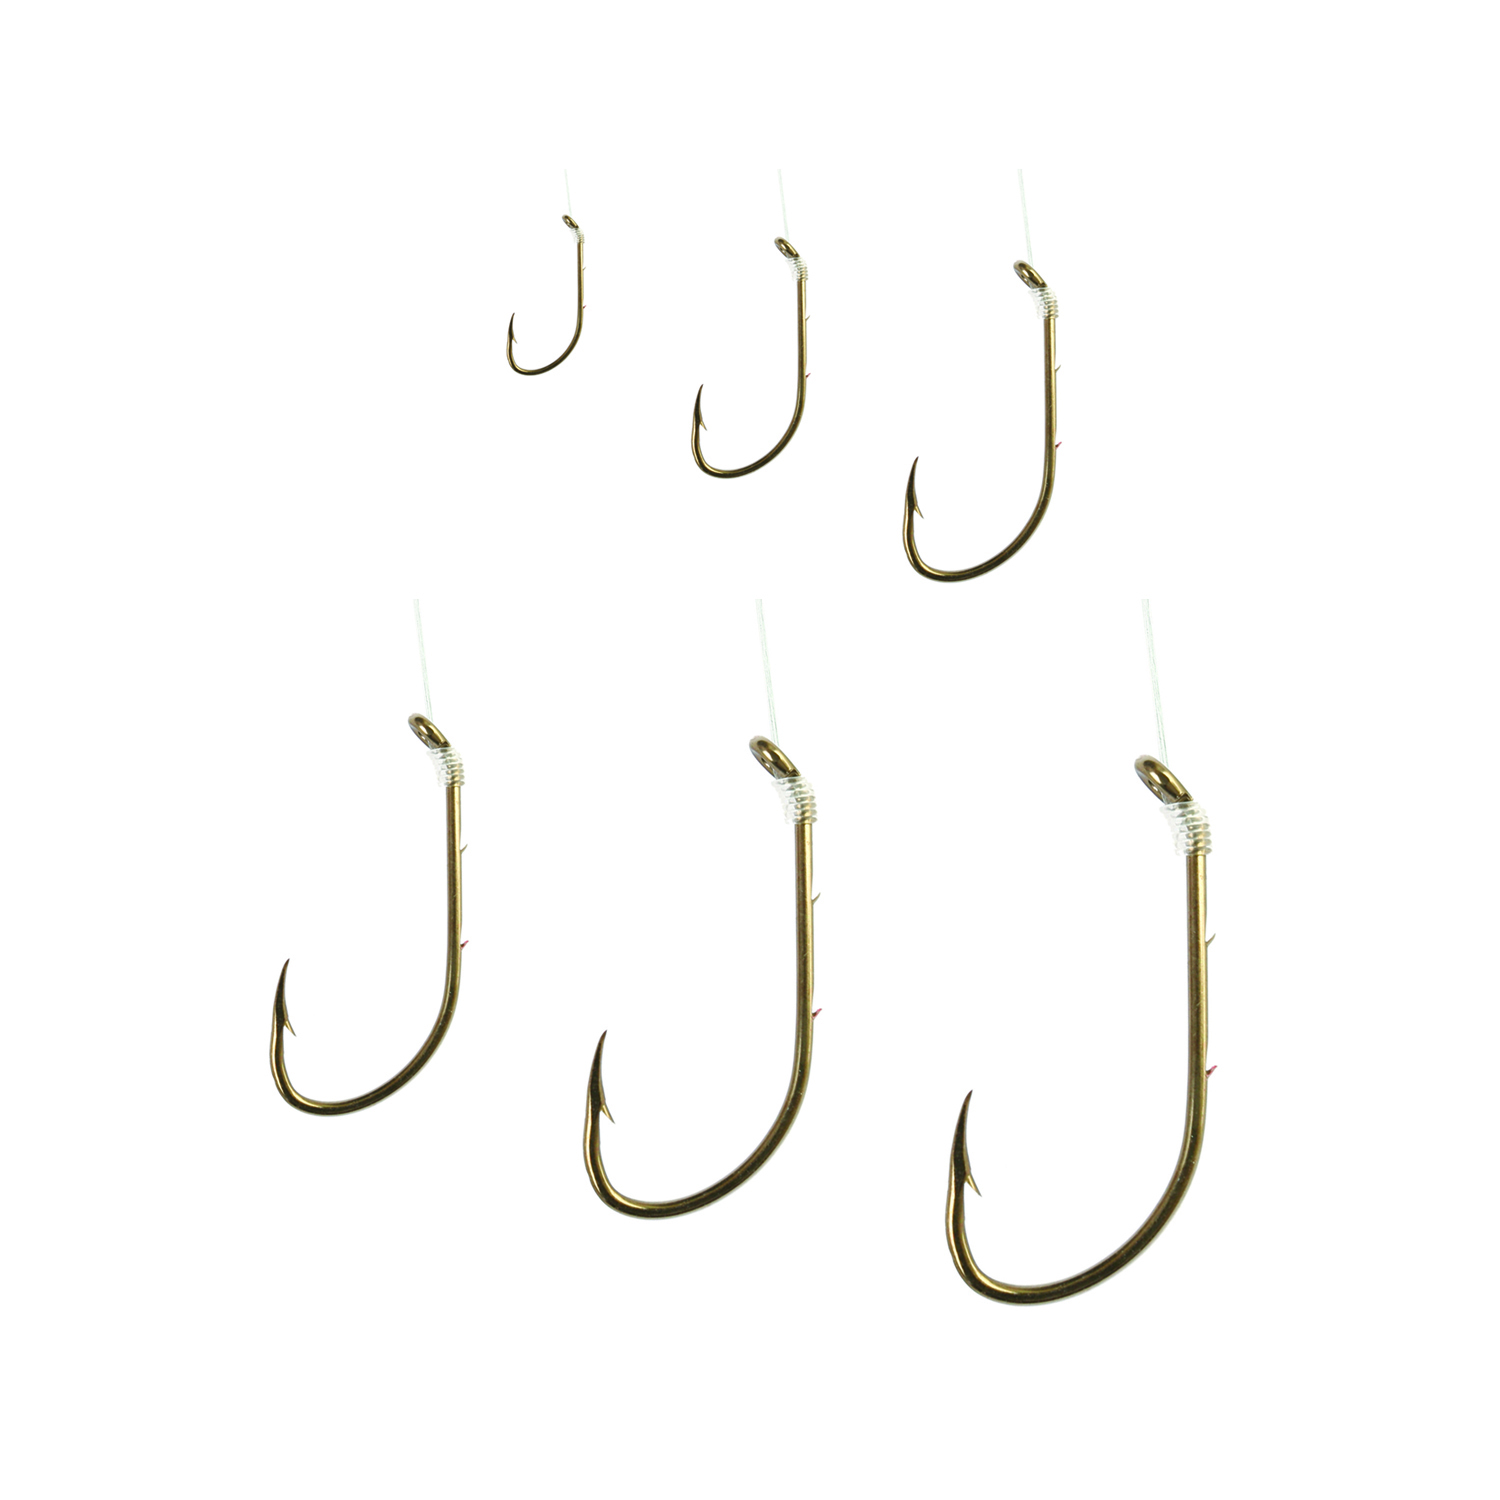 https://op1.0ps.us/original/opplanet-eagle-claw-baitholder-snelled-hook-assortment-6-of-each-size-139qh-main